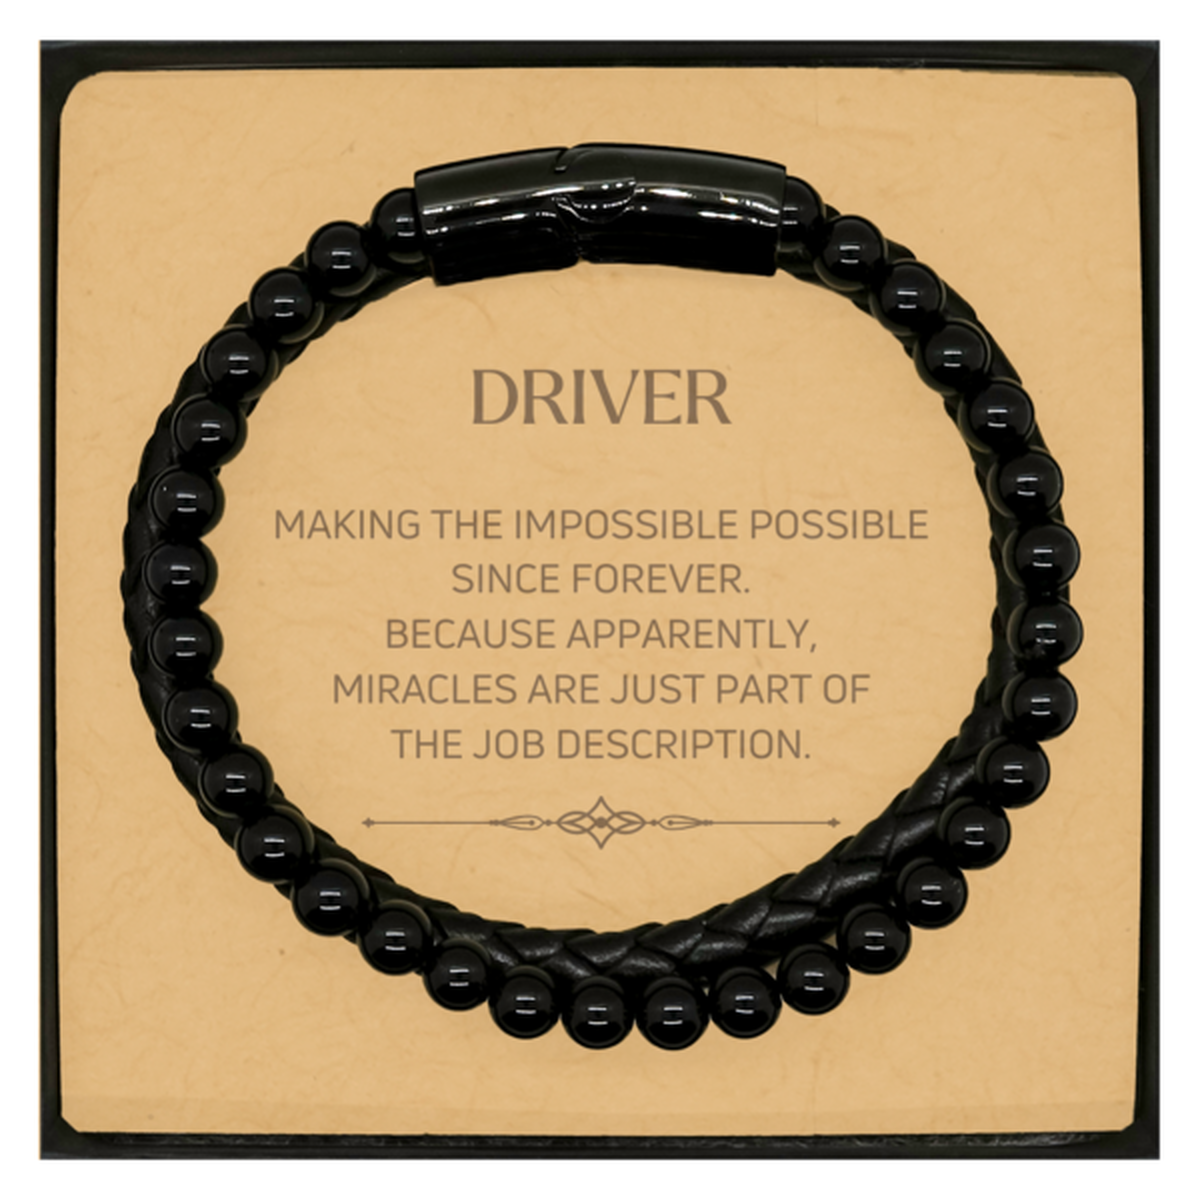 Funny Driver Gifts, Miracles are just part of the job description, Inspirational Birthday Christmas Stone Leather Bracelets For Driver, Men, Women, Coworkers, Friends, Boss